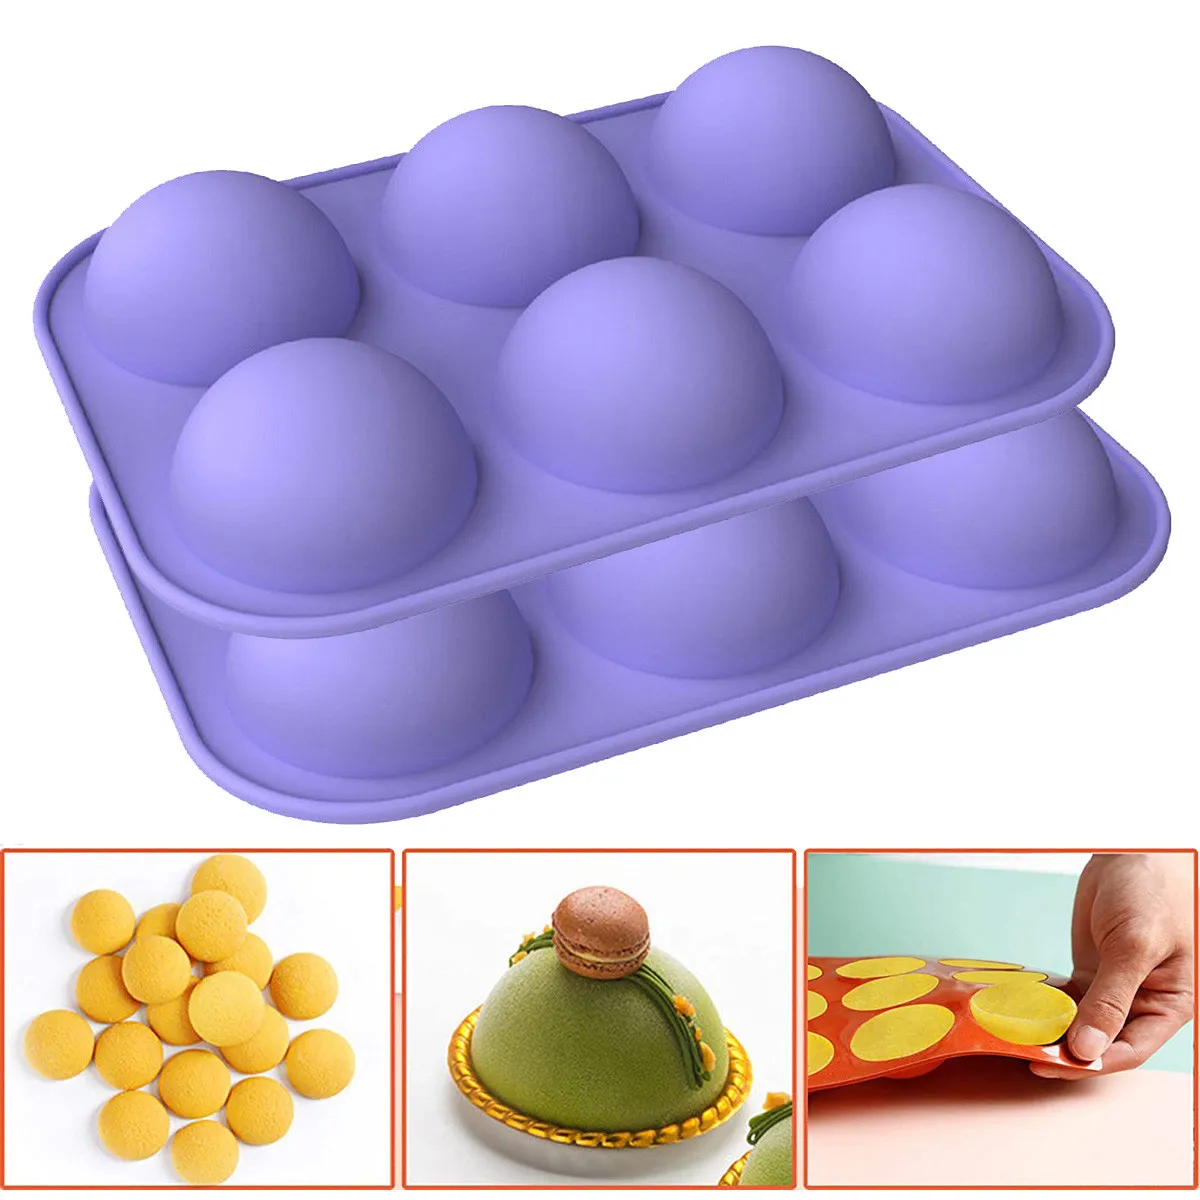 

32PC Half Ball Sphere Silicone Cake Mold Muffin Chocolate Cookie Baking Mould Decor round candy pudding jelly soap form cake Dec